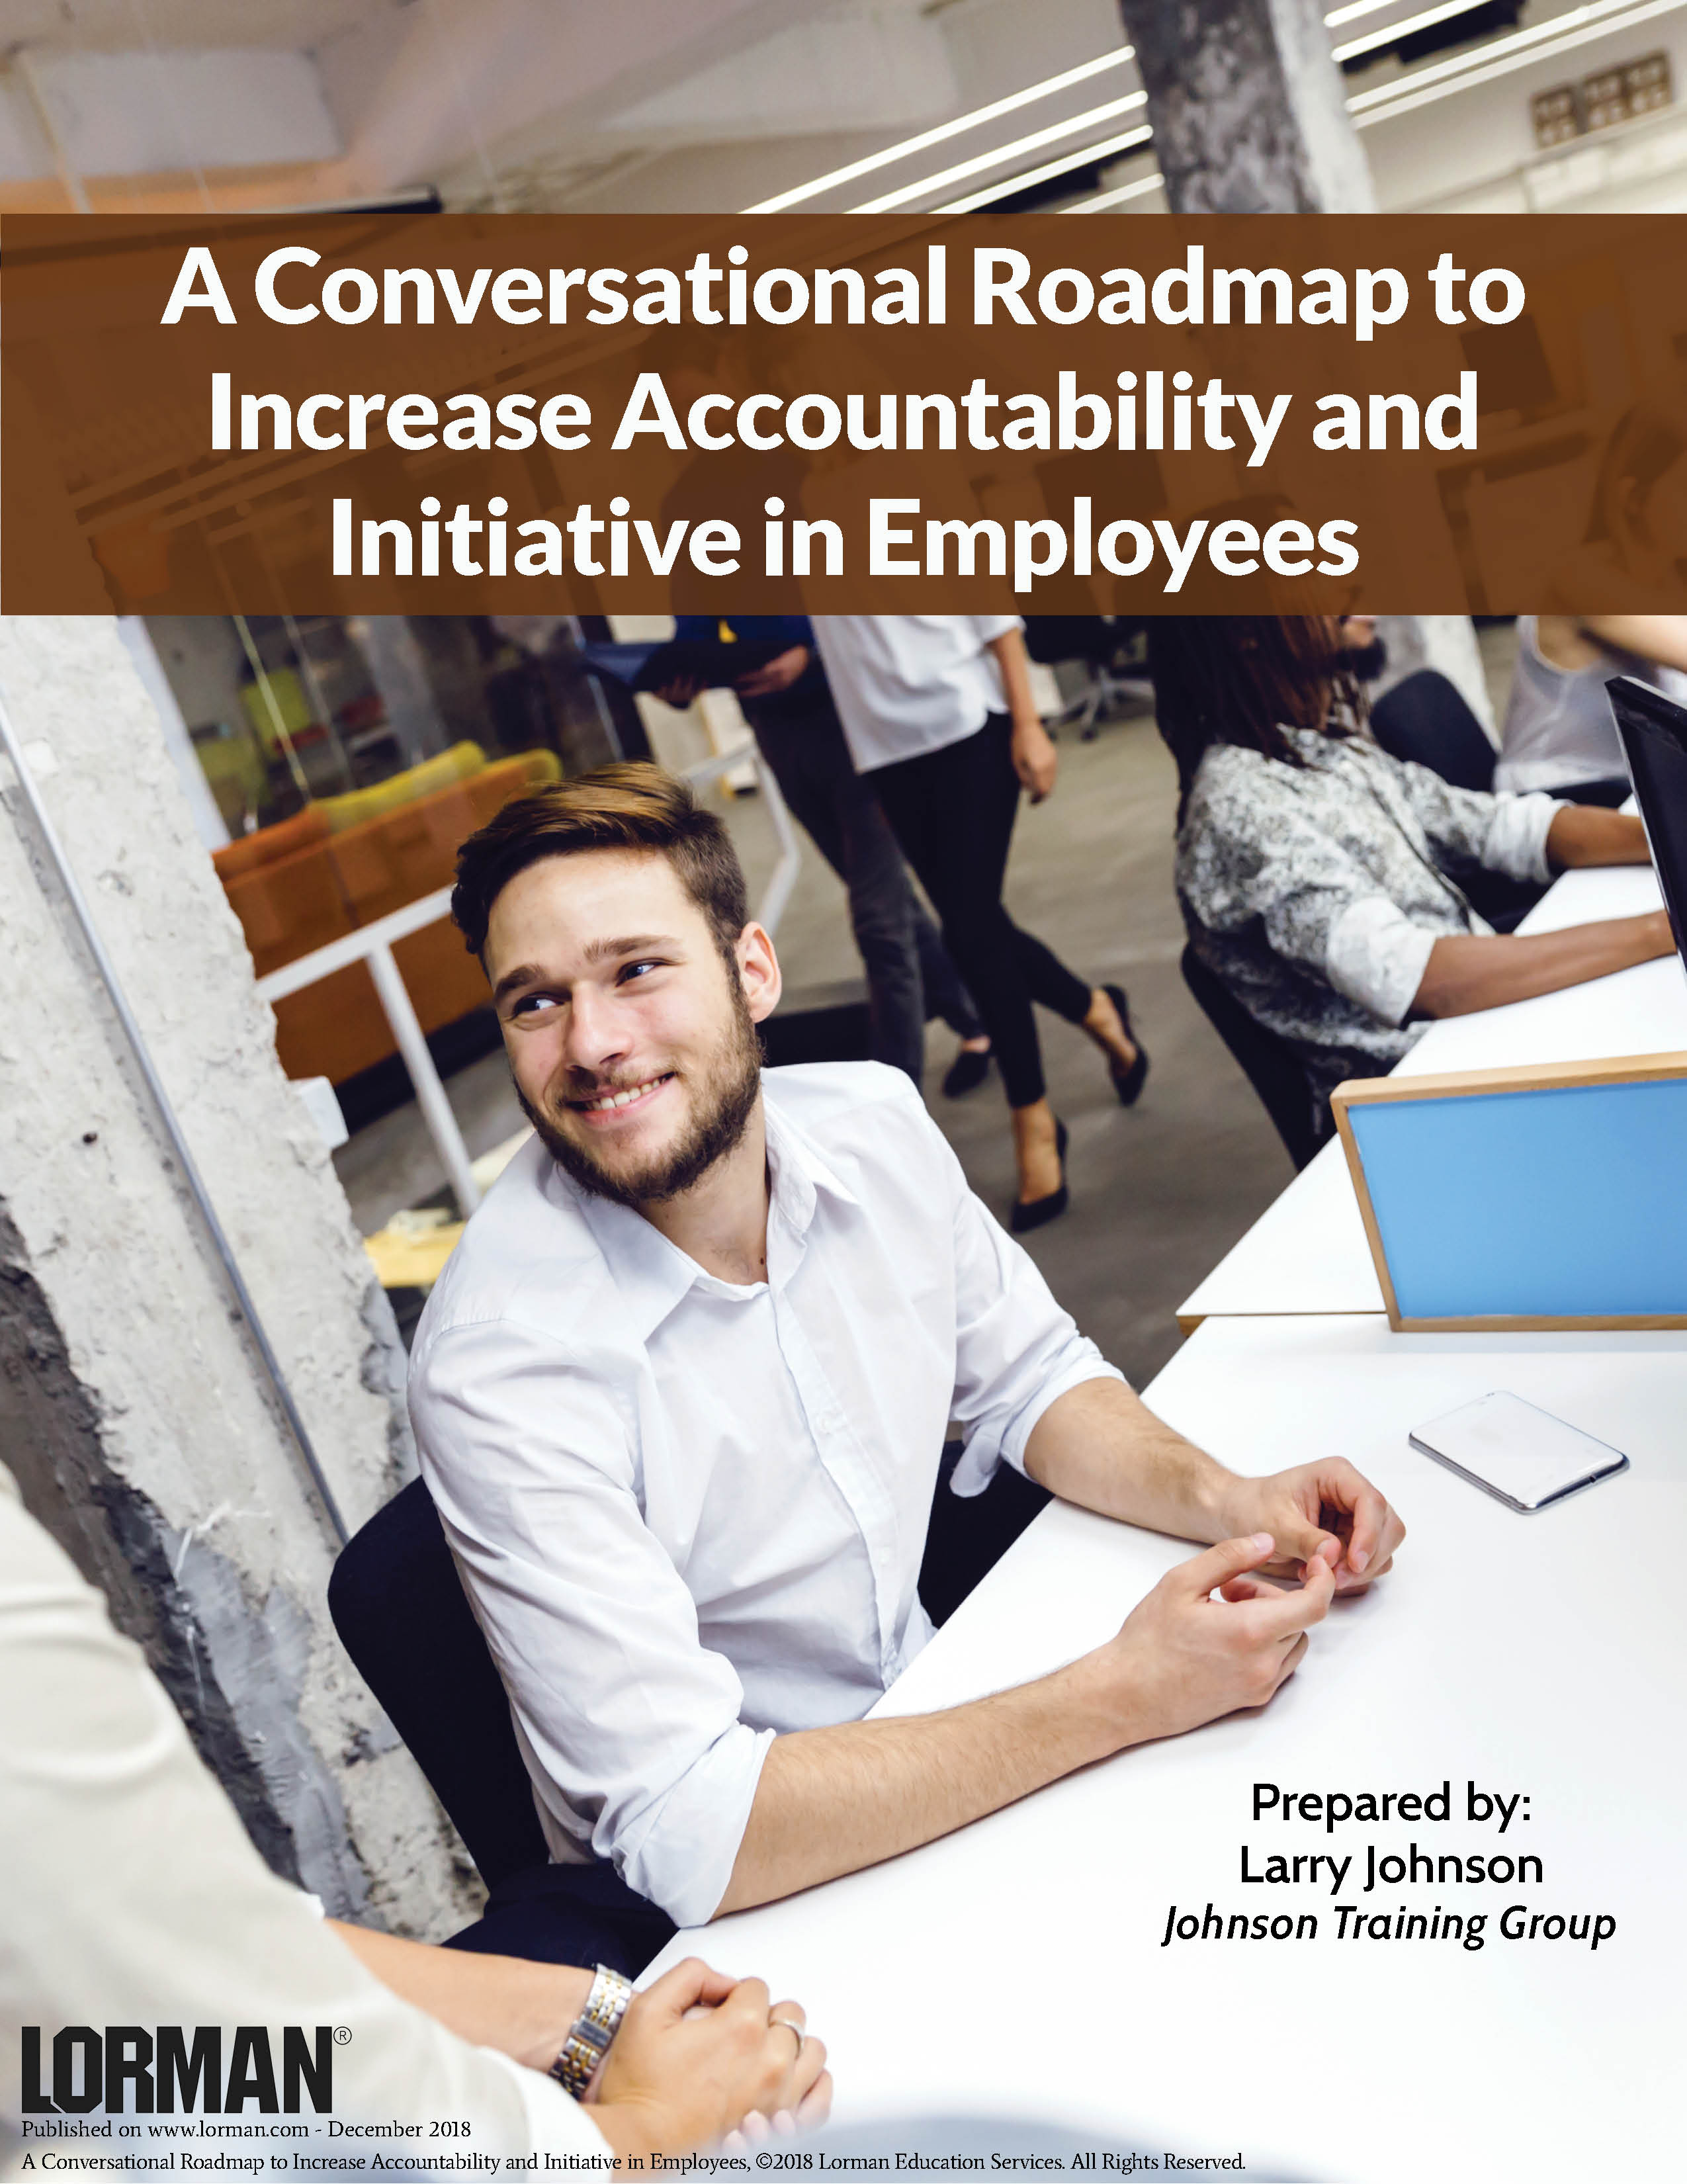 A Conversational Roadmap to Increase Accountability and Initiative in Employees